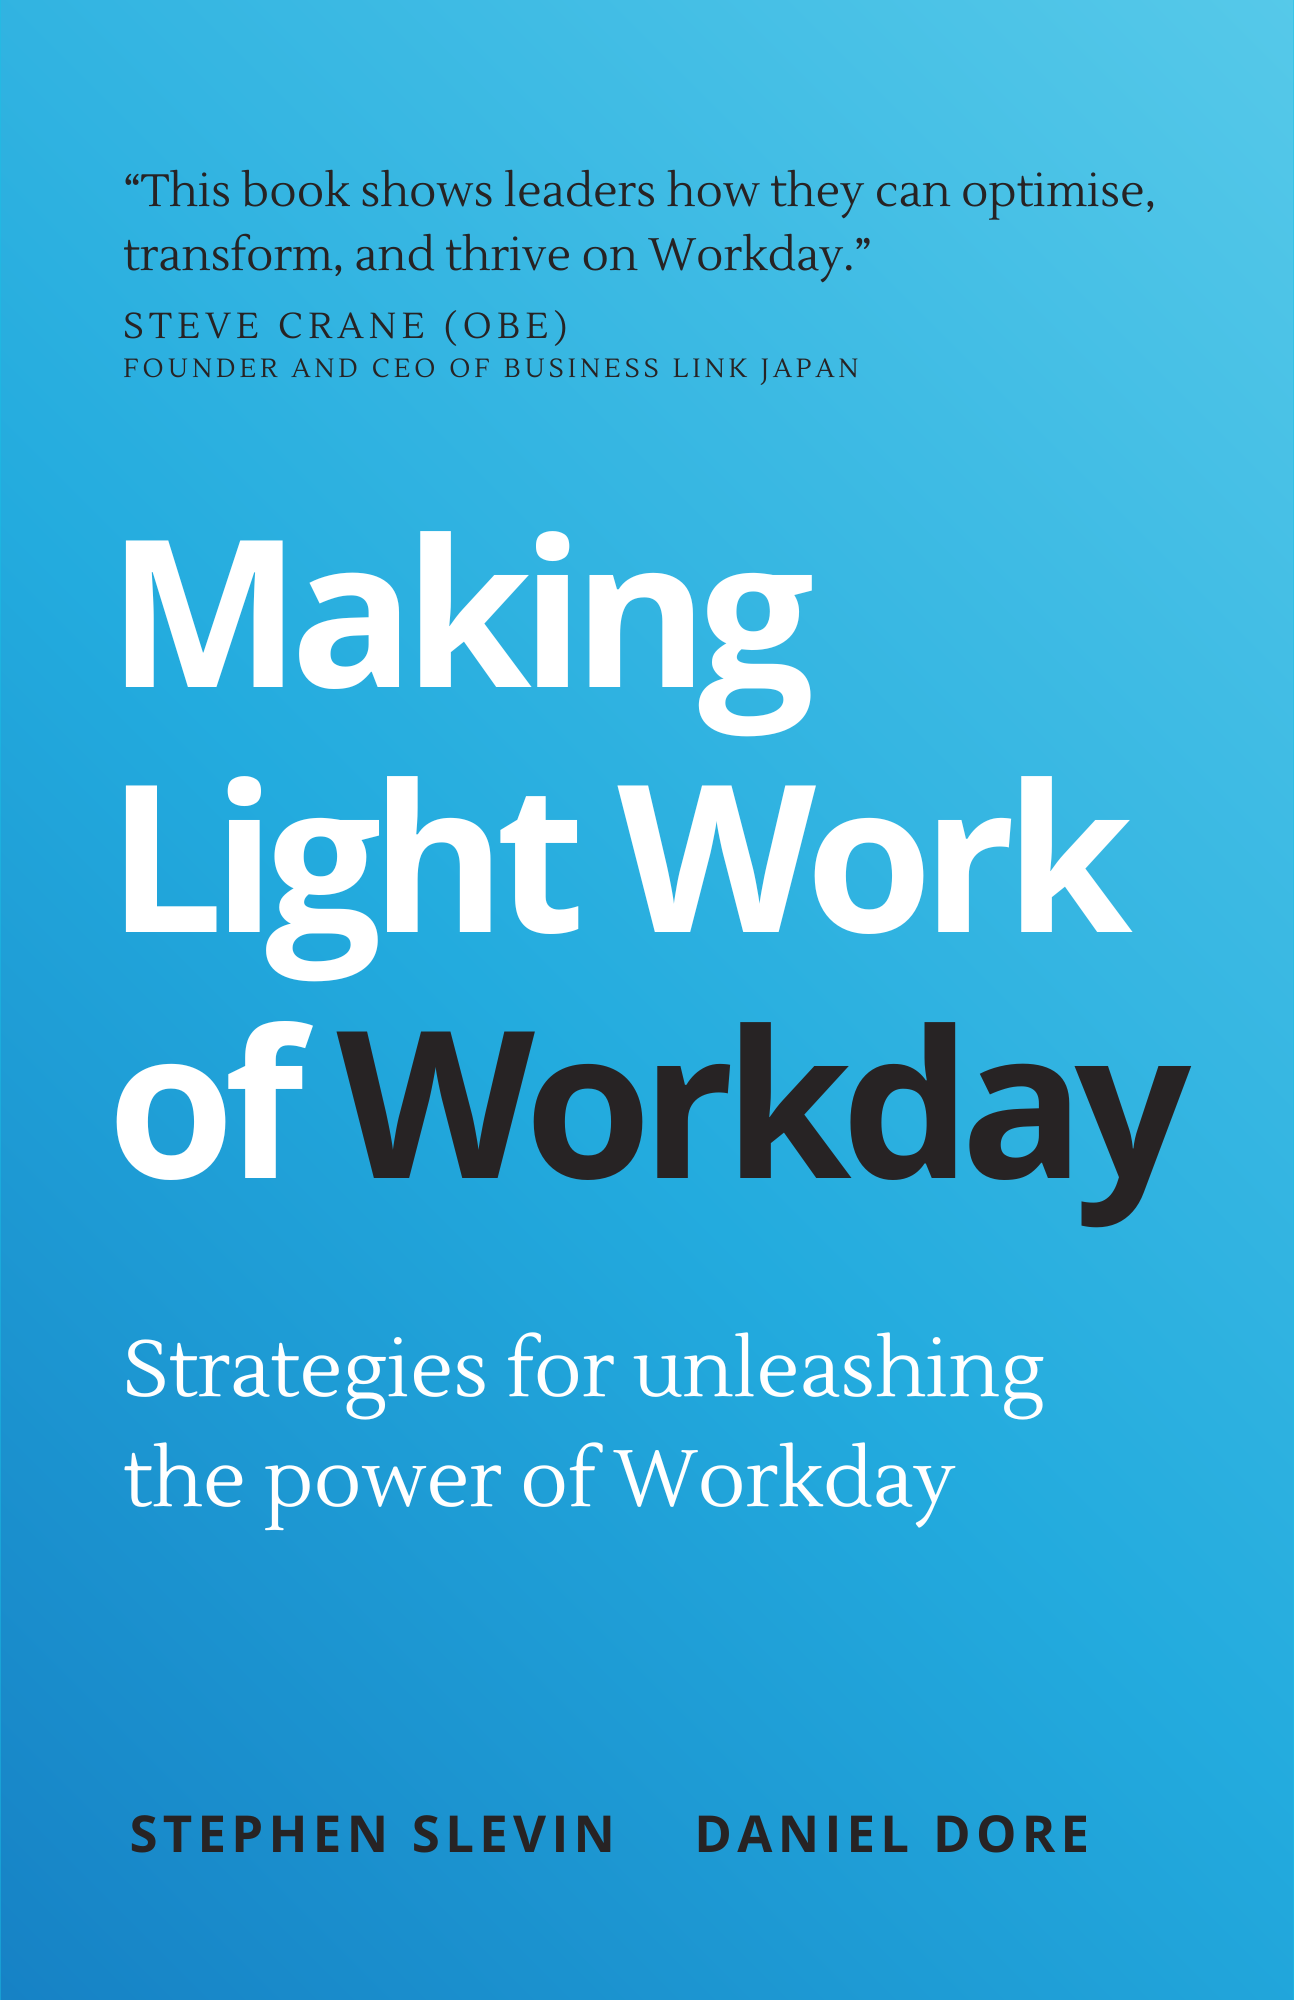 Making Light Work of Workday